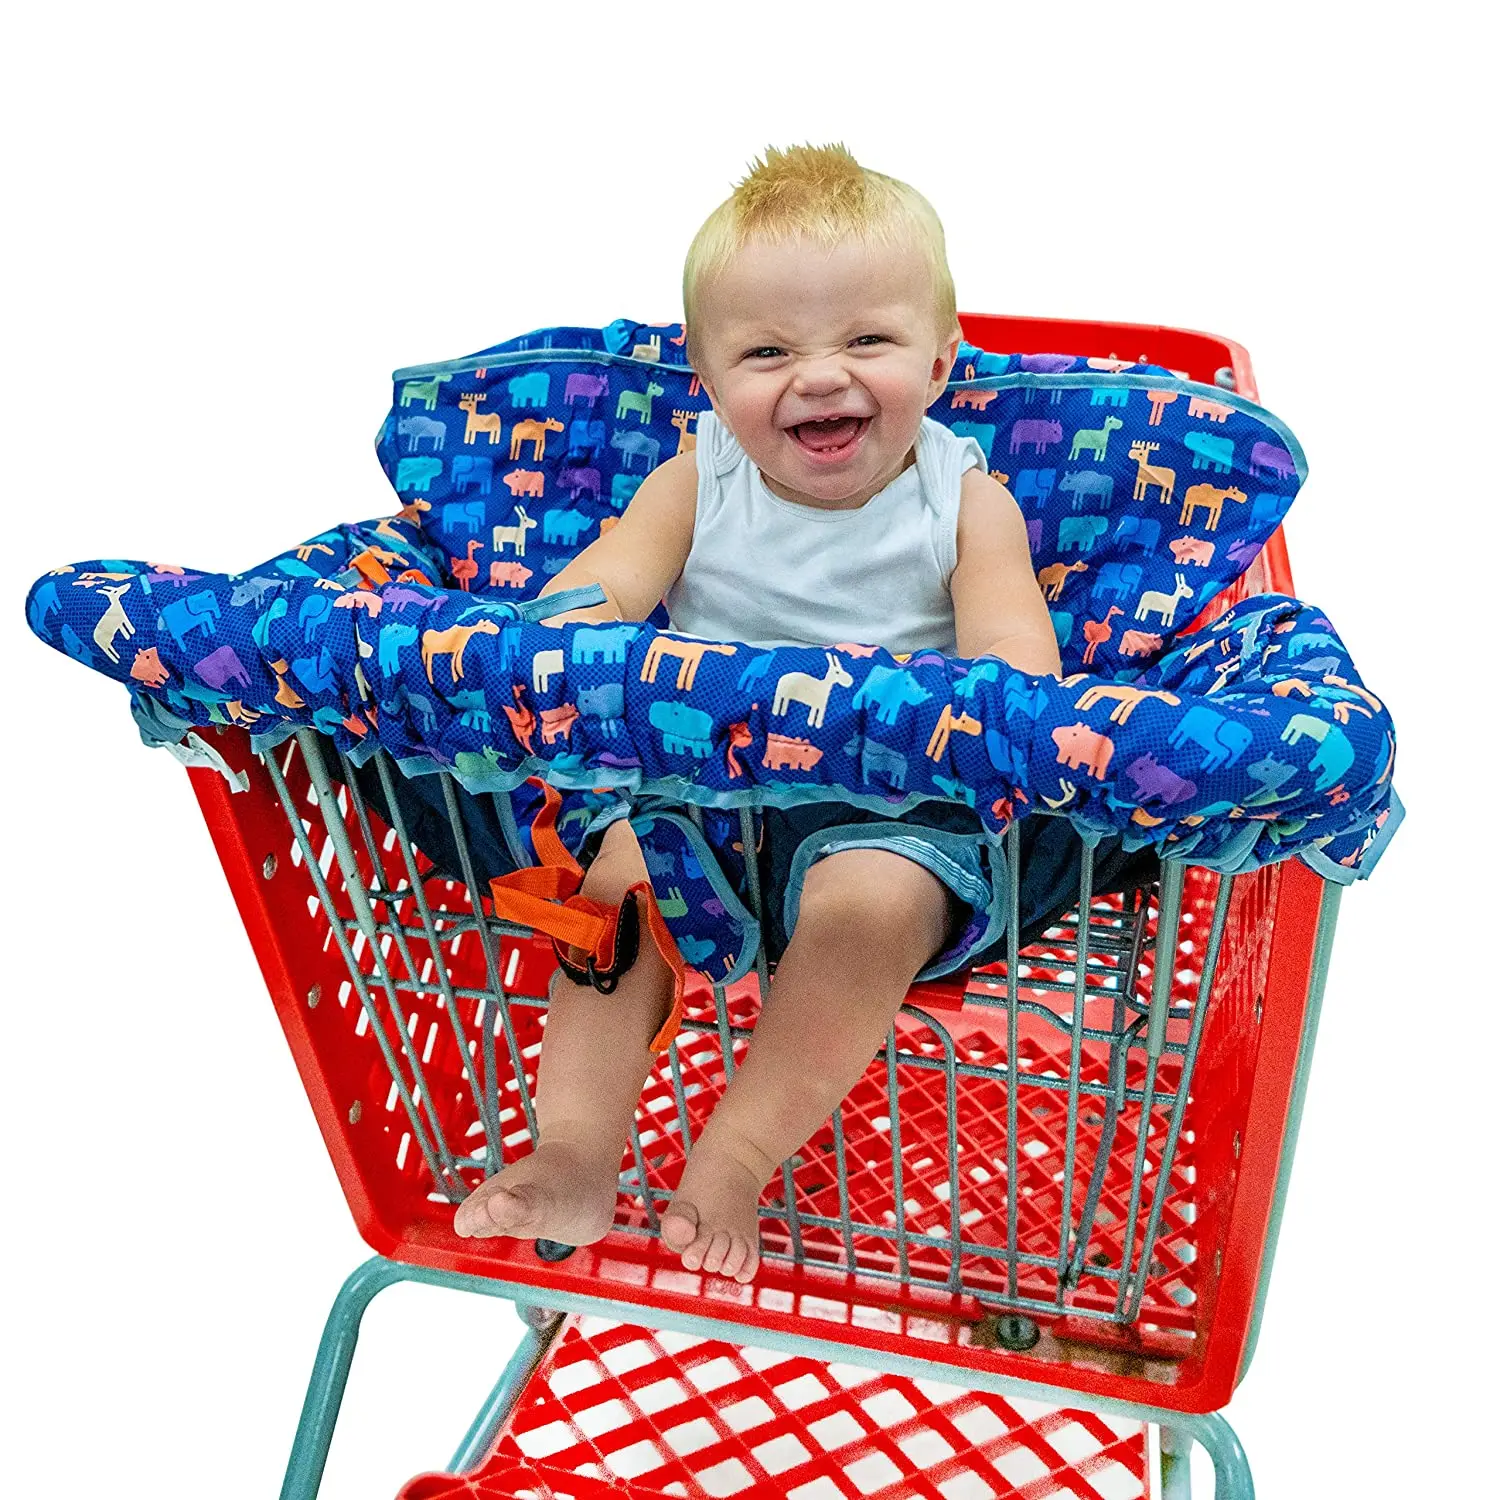 Universal Baby Kids 2-IN-1 Shopping Cart Cover HighChair Cover For Toddler Cover Restaurant Highchair Dinosaurs Cheaper eco friendly reusable cart cover shopping cart handle cover cart cover for grocery cart buggy handles safe for adults babies